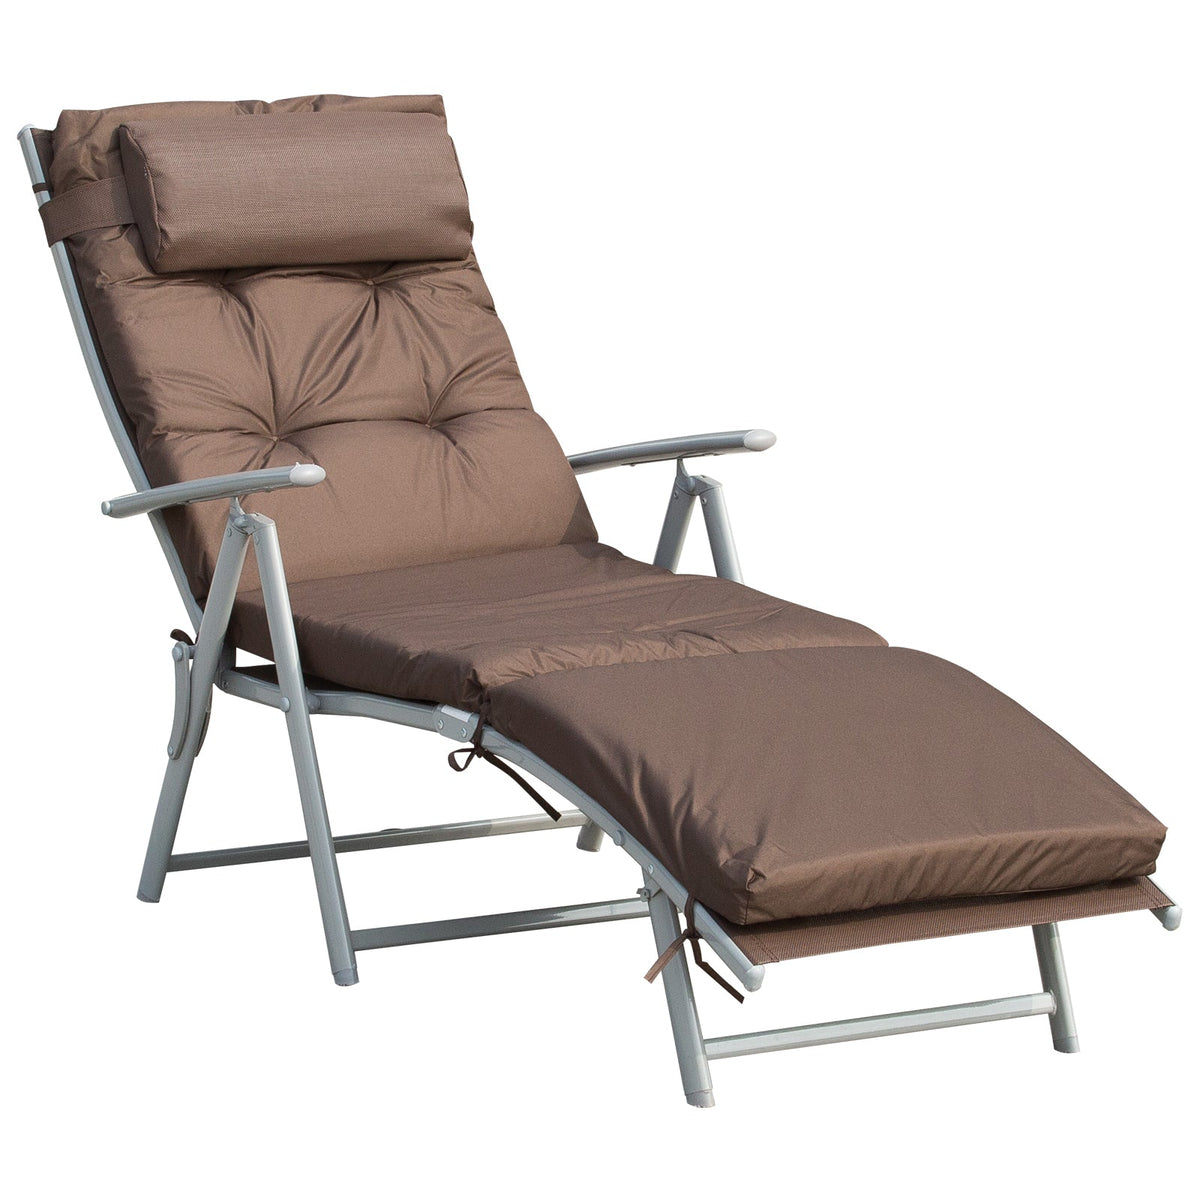 Outsunny Garden Sun Lounger, Foldable Reclining Chair with Pillow and Adjustable Back, Texteline Fabric, Brown - TovaHaus